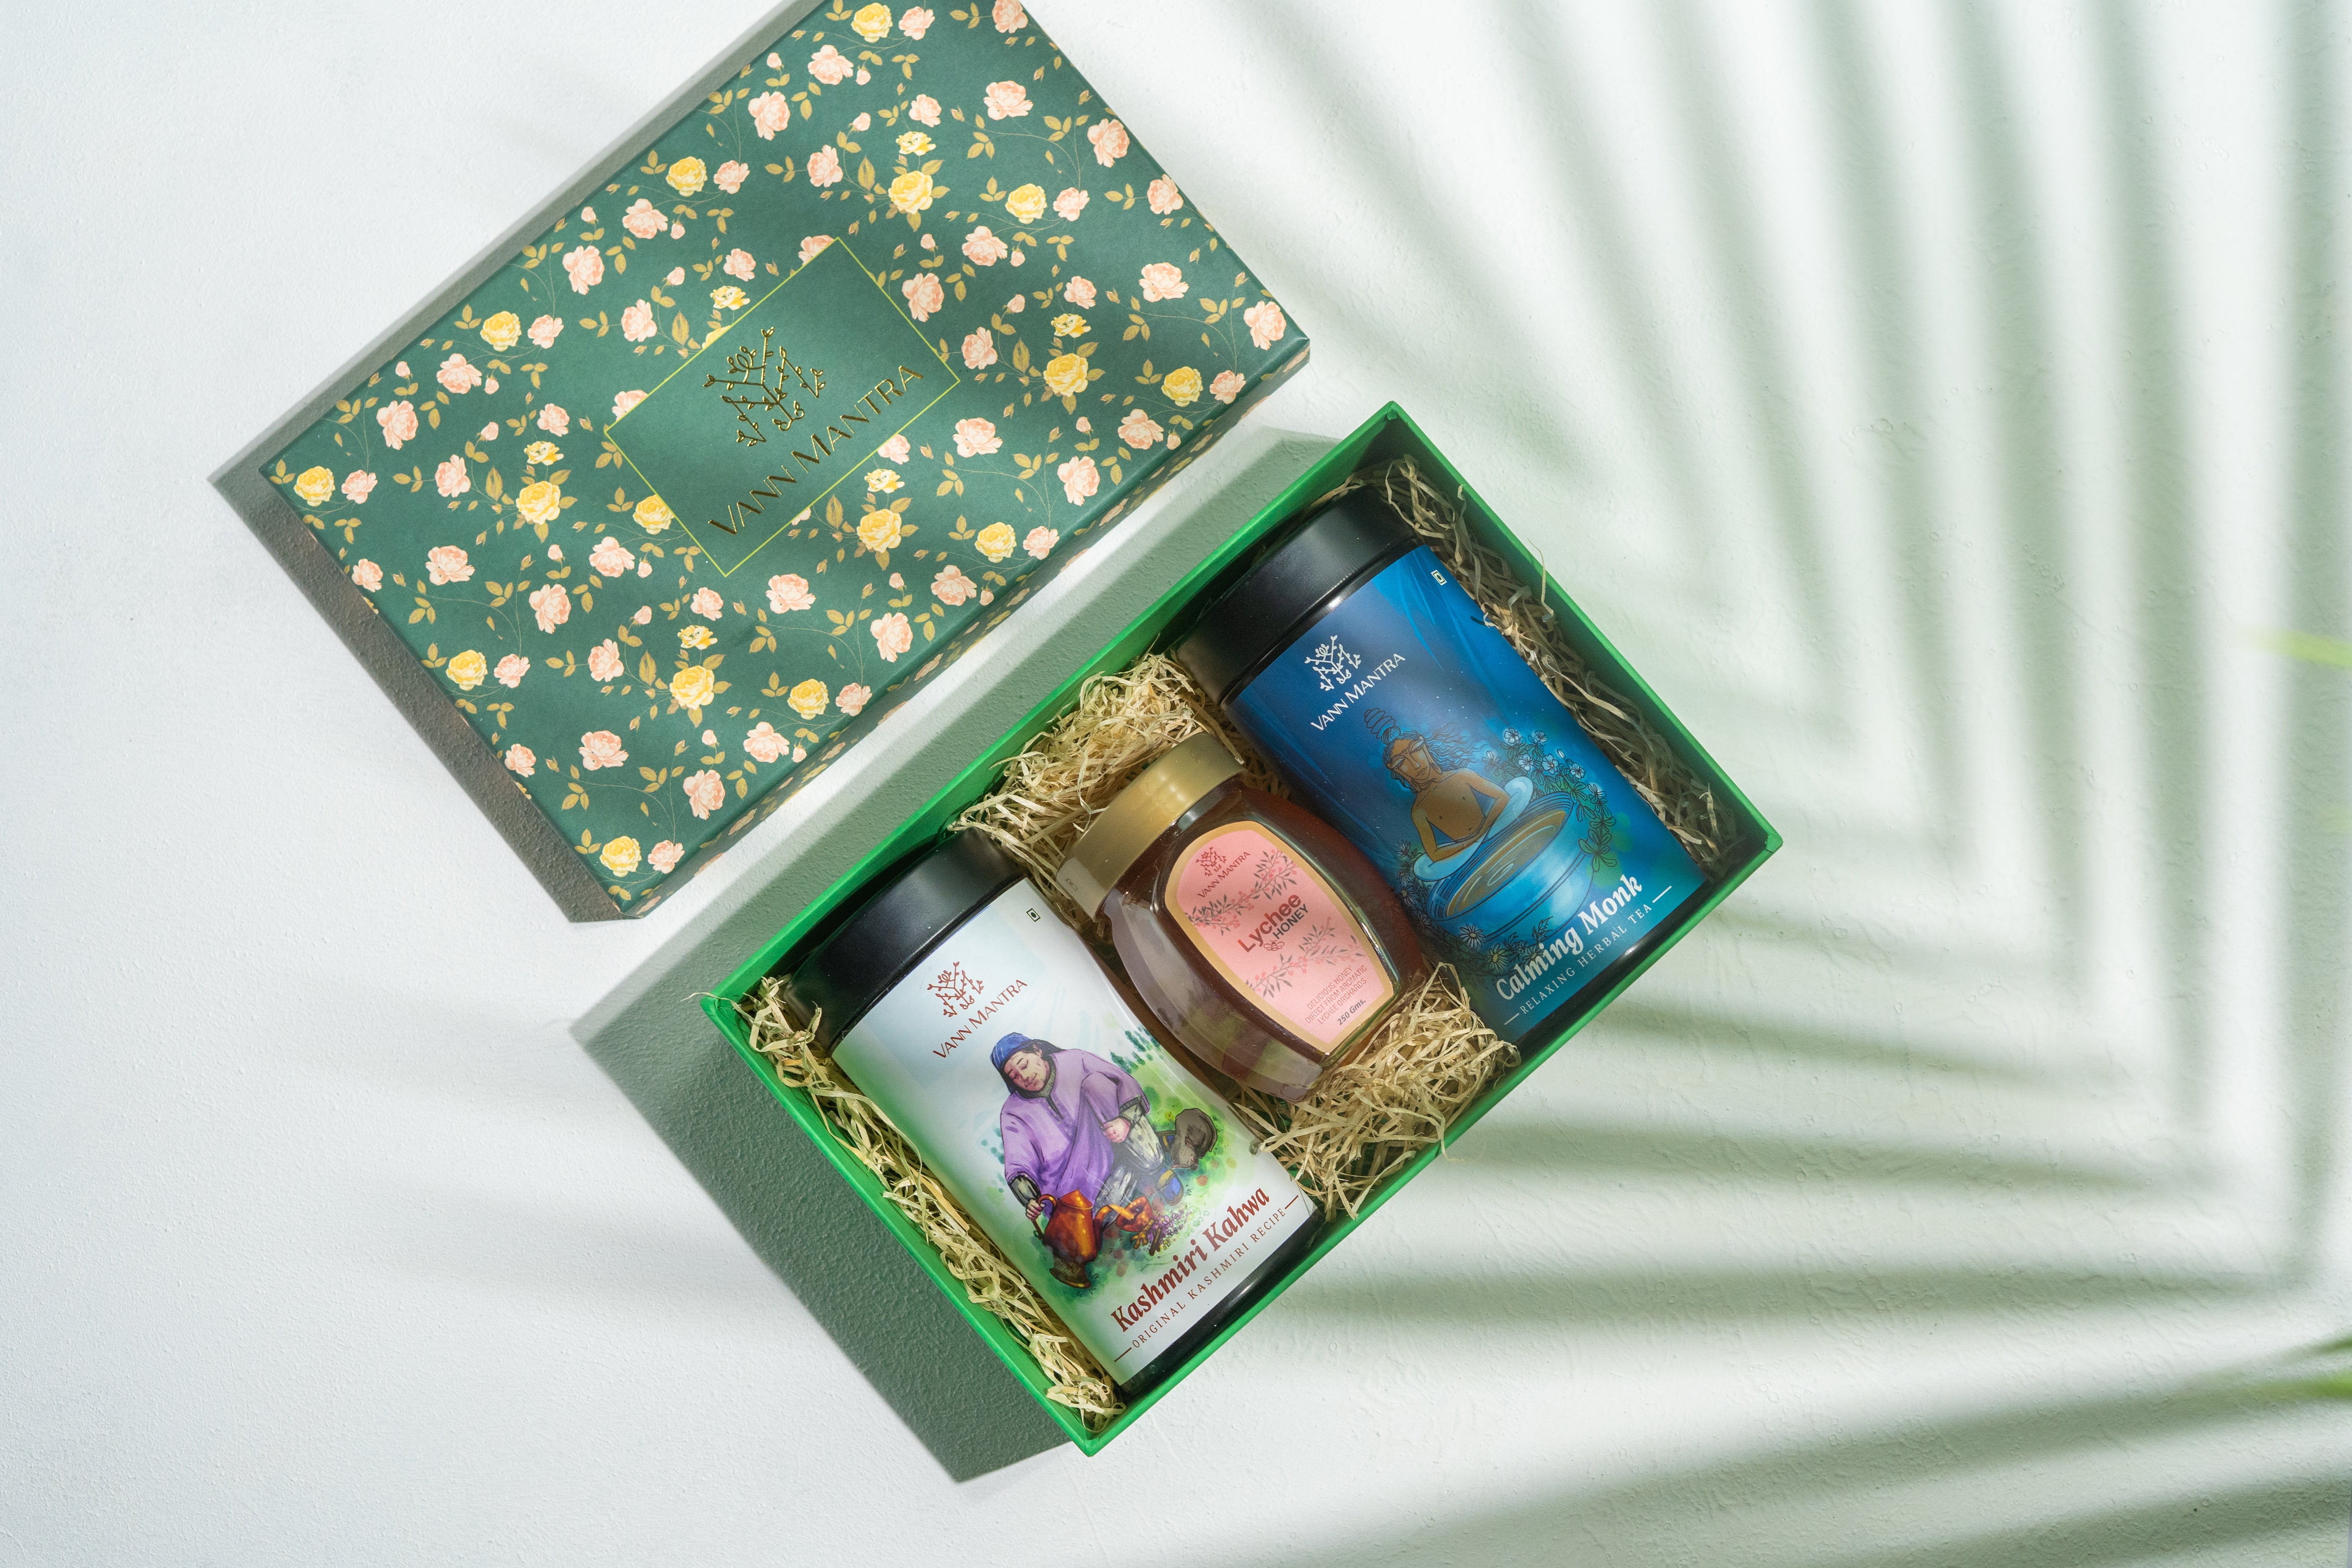 Box Of Serenity (Kashmiri Kahwa, Calming Monk, Lychee Honey) on a backdrop with plants